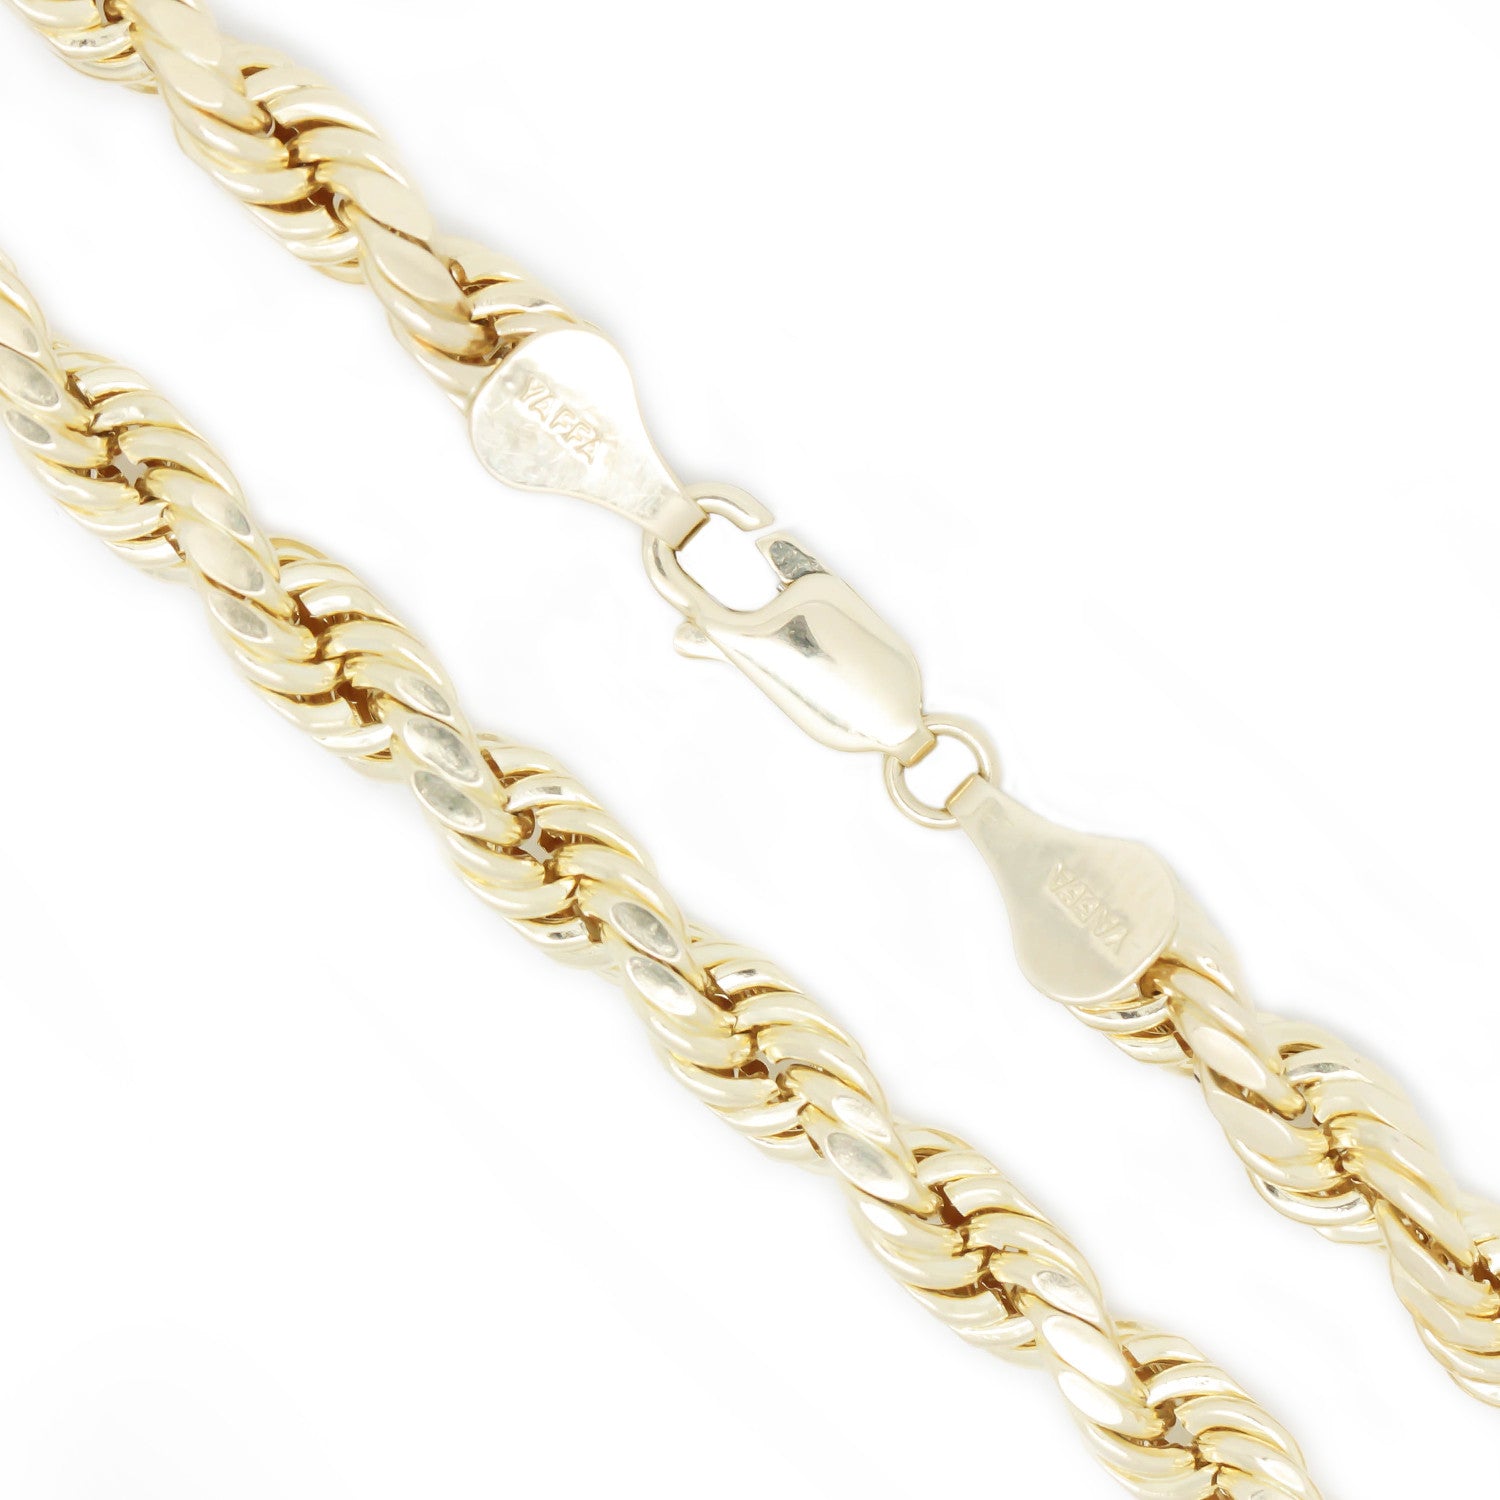 14K Yellow Gold 1.88 mm Rope Chain Necklace 24 Inches